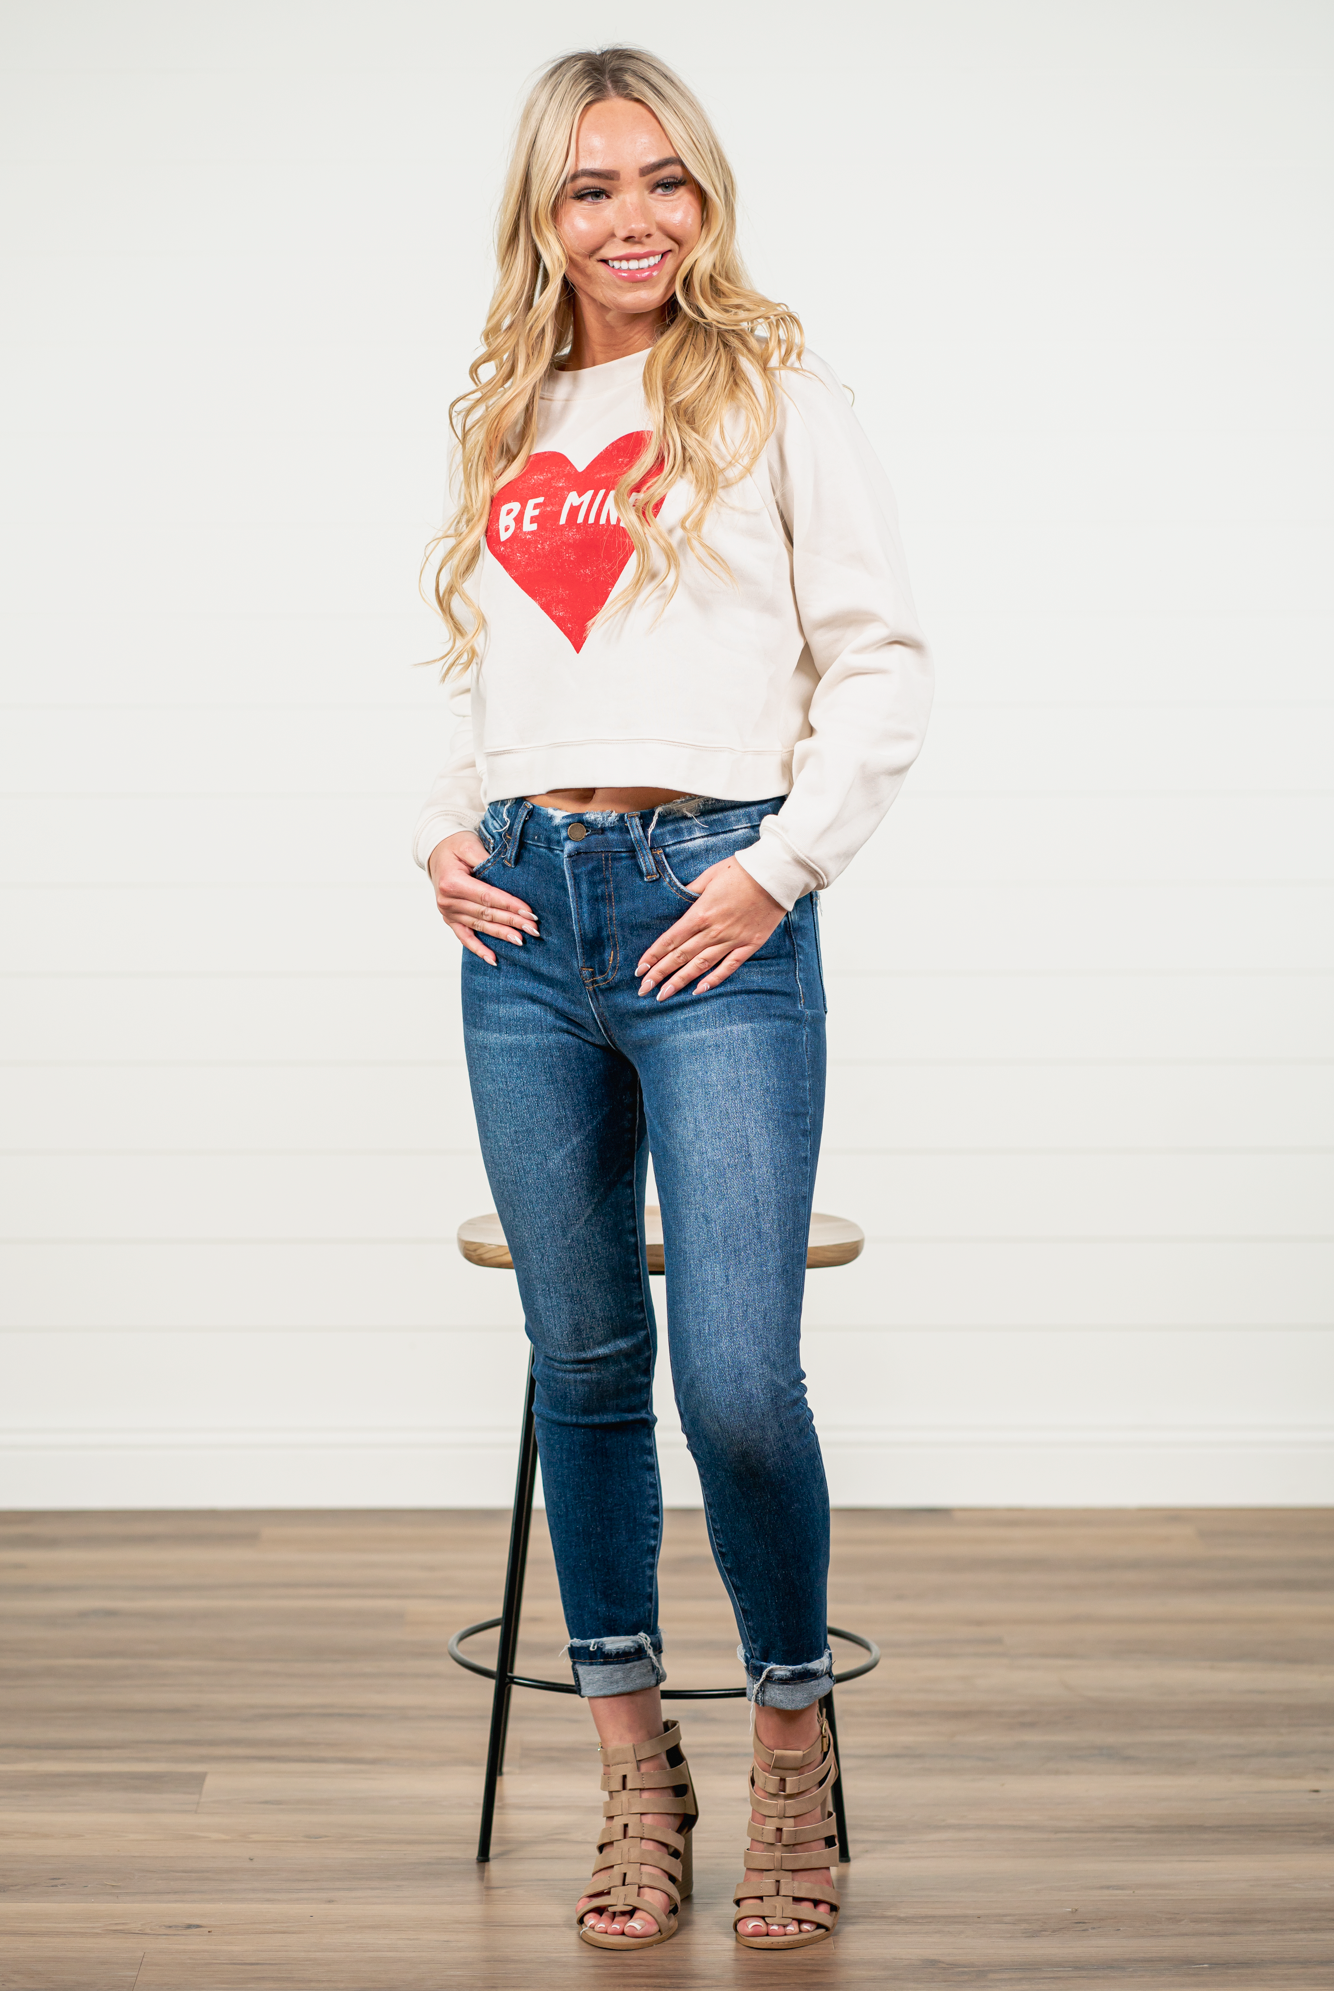 Be Mine by Oat Collective   Graphic Fleece Pullover Relaxed Fit Crop   Color: Vintage White Neckline: Round  Sleeve: Raglan Long Sleeve Spun from plush sponge fleece fabric Ribbed Cuffed Wrist Bands Oversized Pull Over Style #: OT2112L686 Contact us for any additional measurements or sizing.    